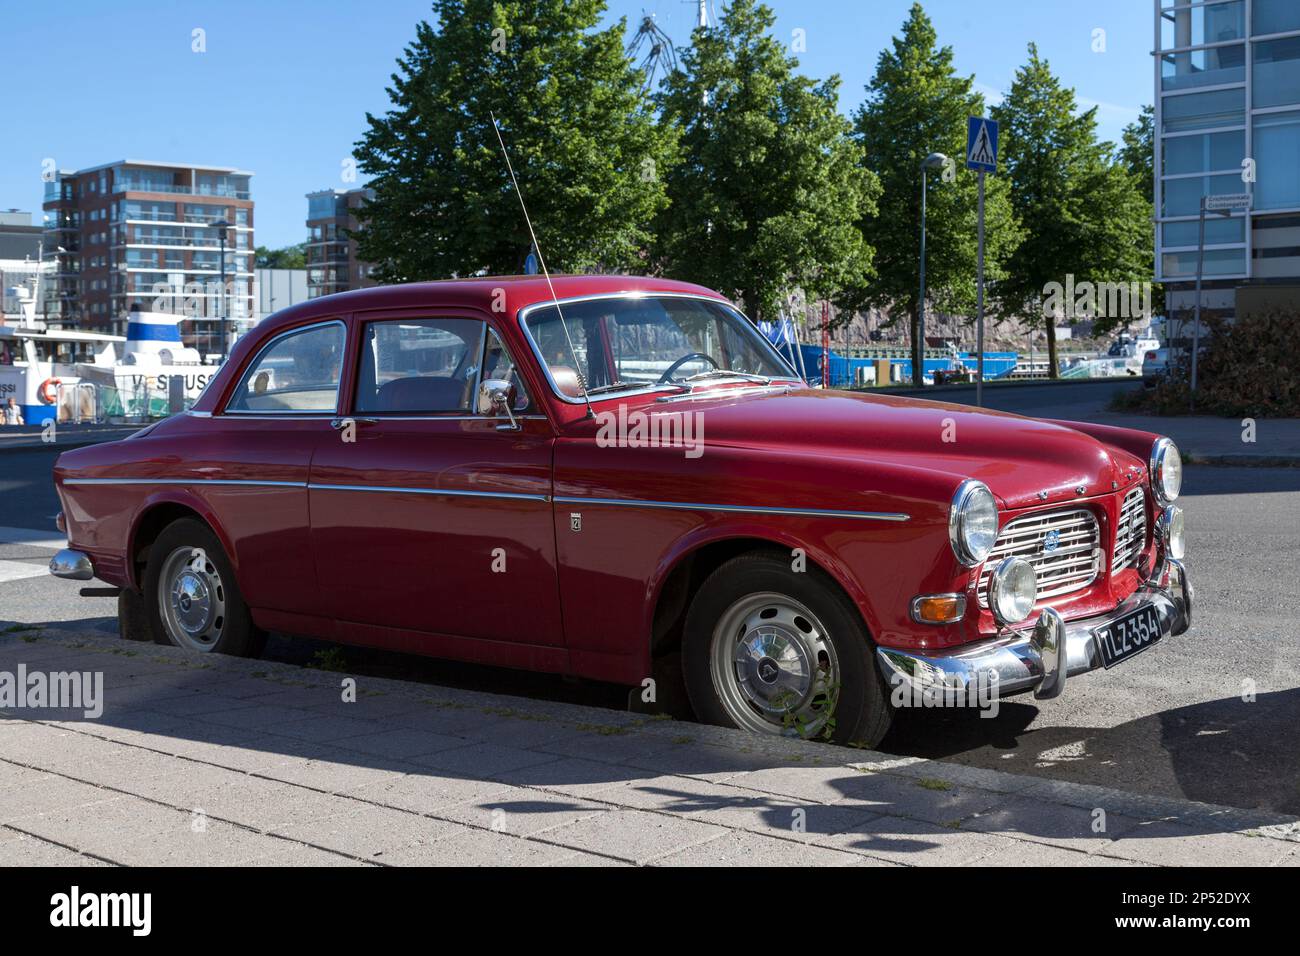 Turku, Finland - June 21 2019: The Volvo Amazon was a mid-sized car manufactured and marketed by Volvo Cars from 1956 to 1970. Stock Photo